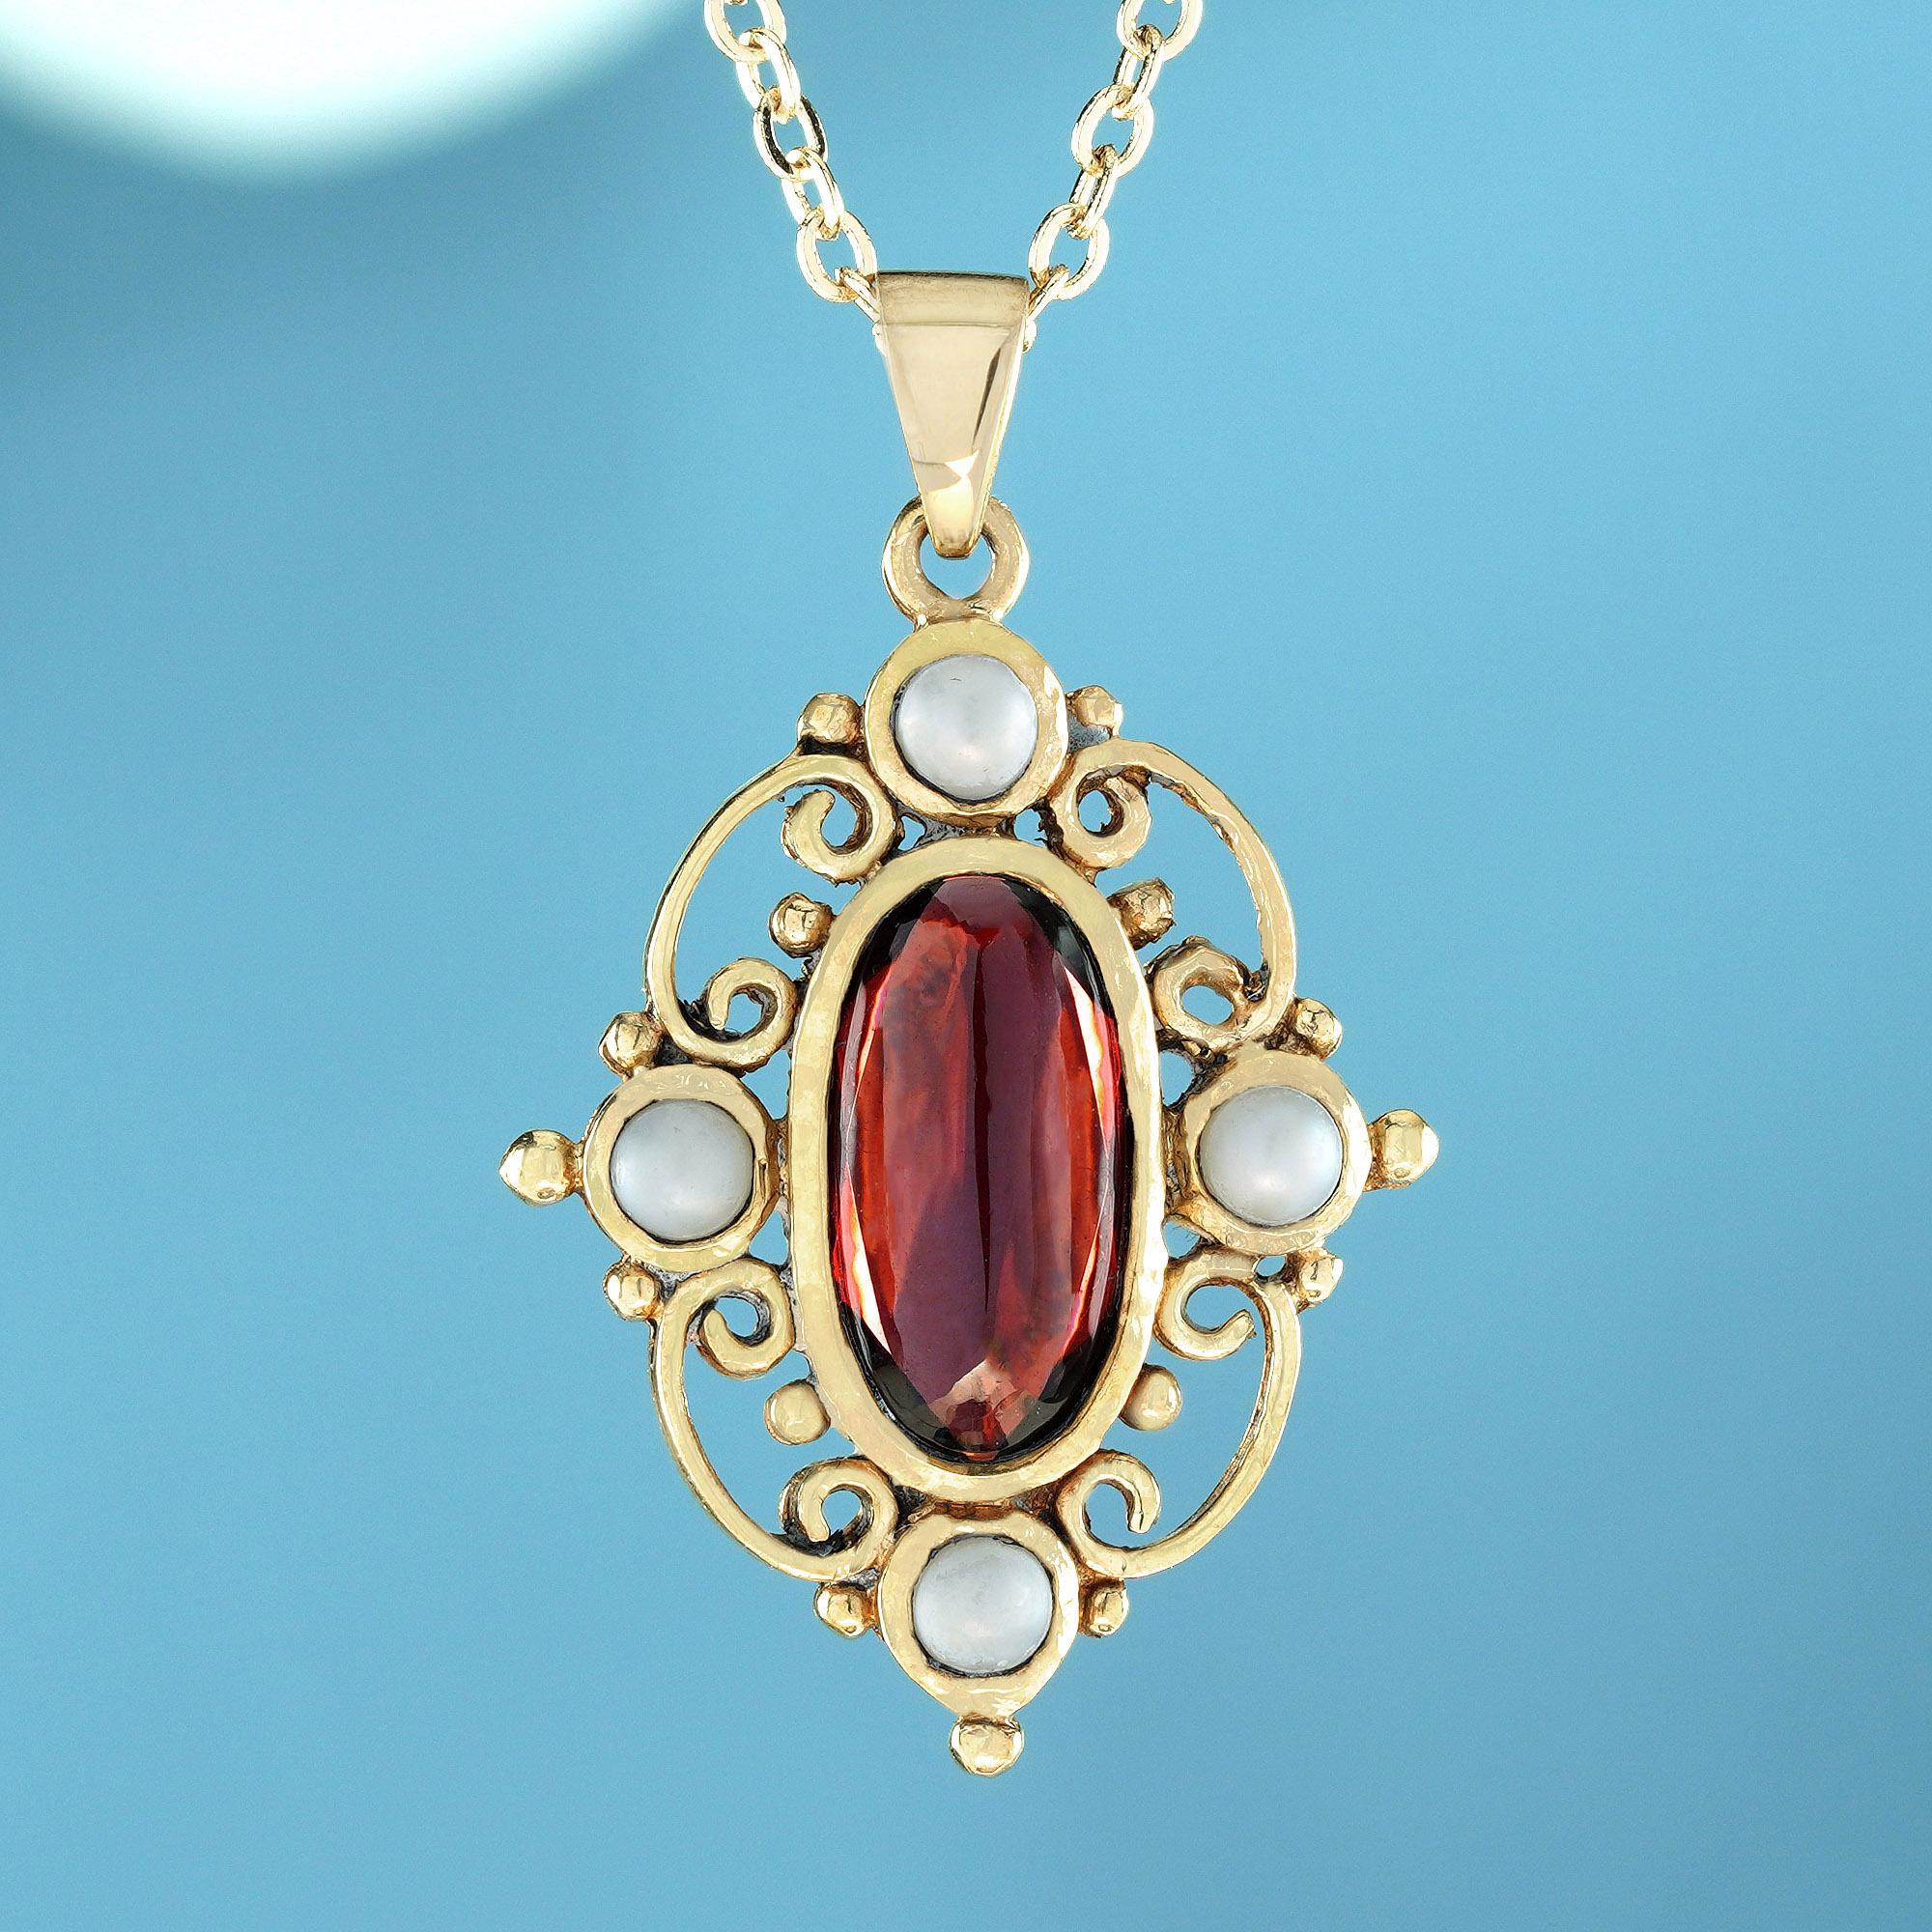 Encased within a vintage Victorian-style yellow gold frame, this distinctive pendant showcases a captivating design.  The delicate curved yellow gold openwork pendant features a large, red oval-shaped cabochon garnet in the center, surrounded by a